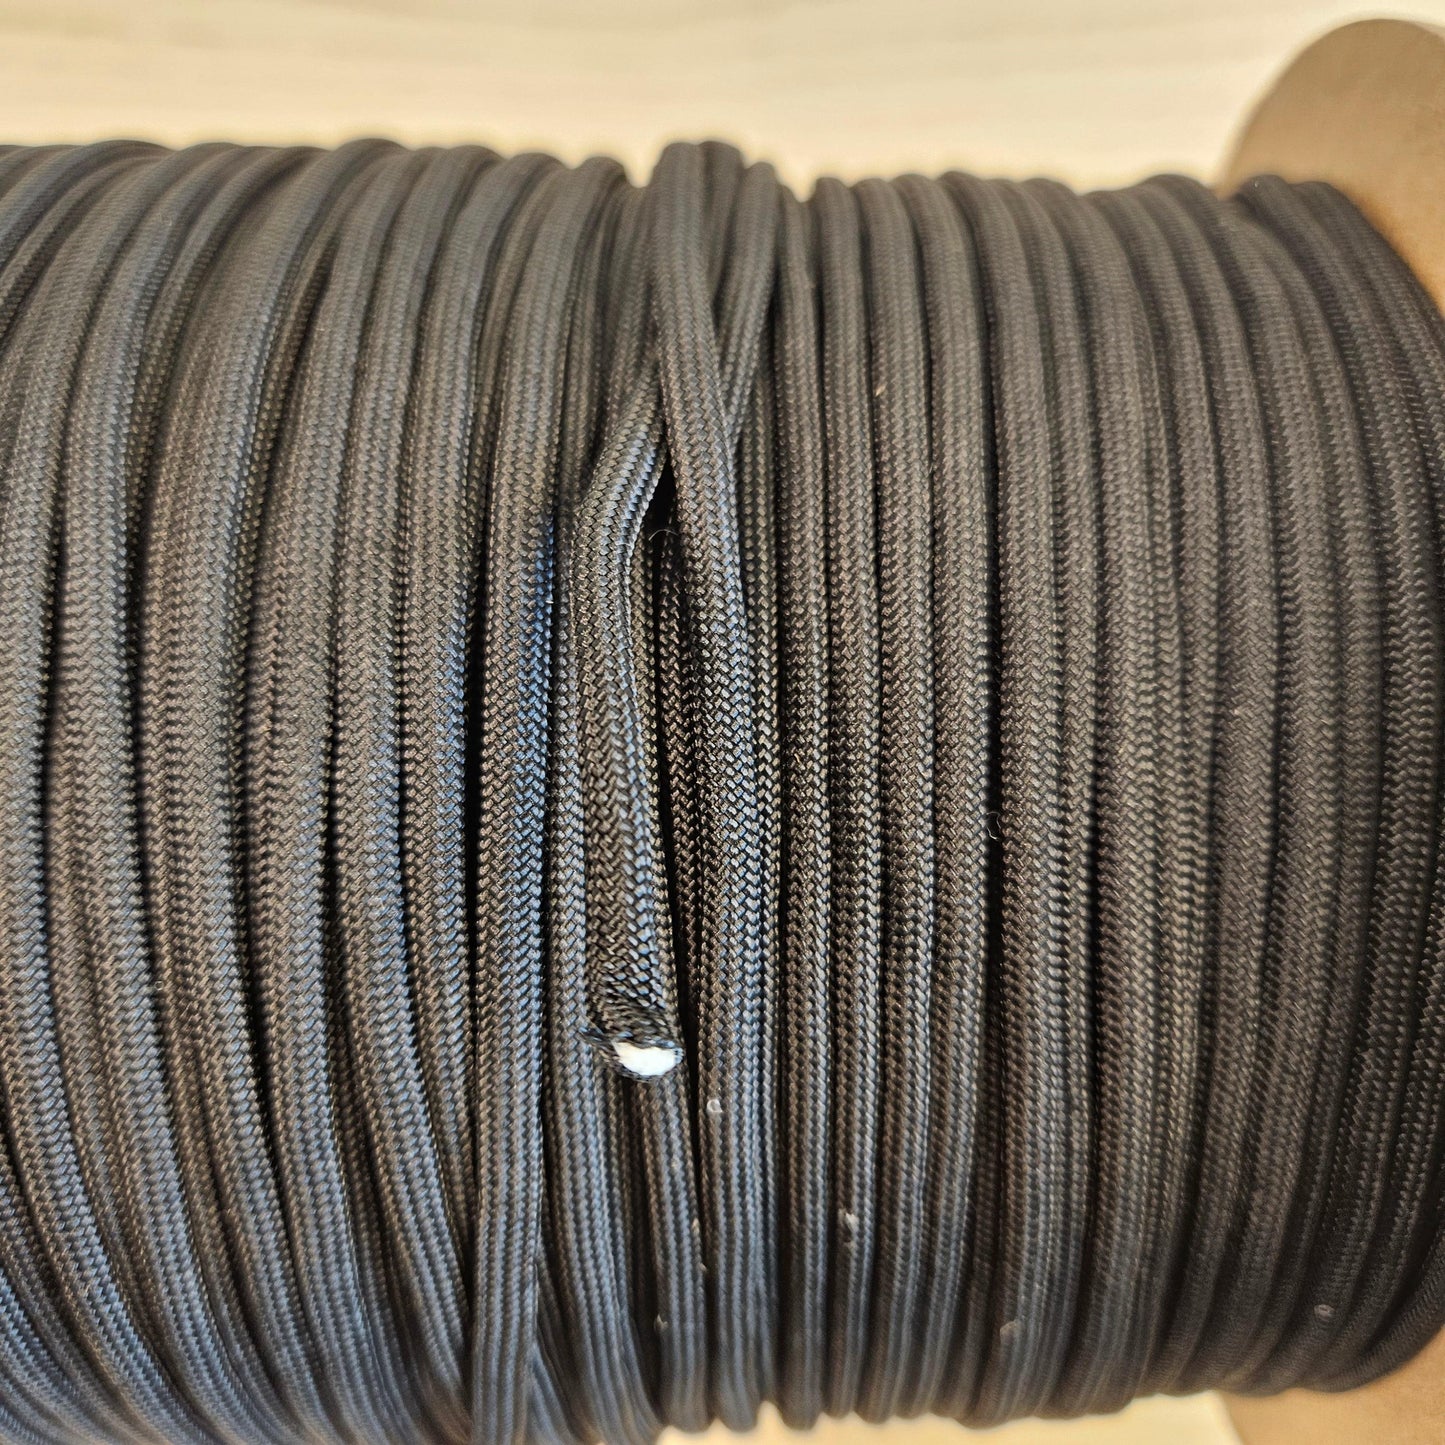 650 Paracord - Black - Clearance Item - Cams Cords